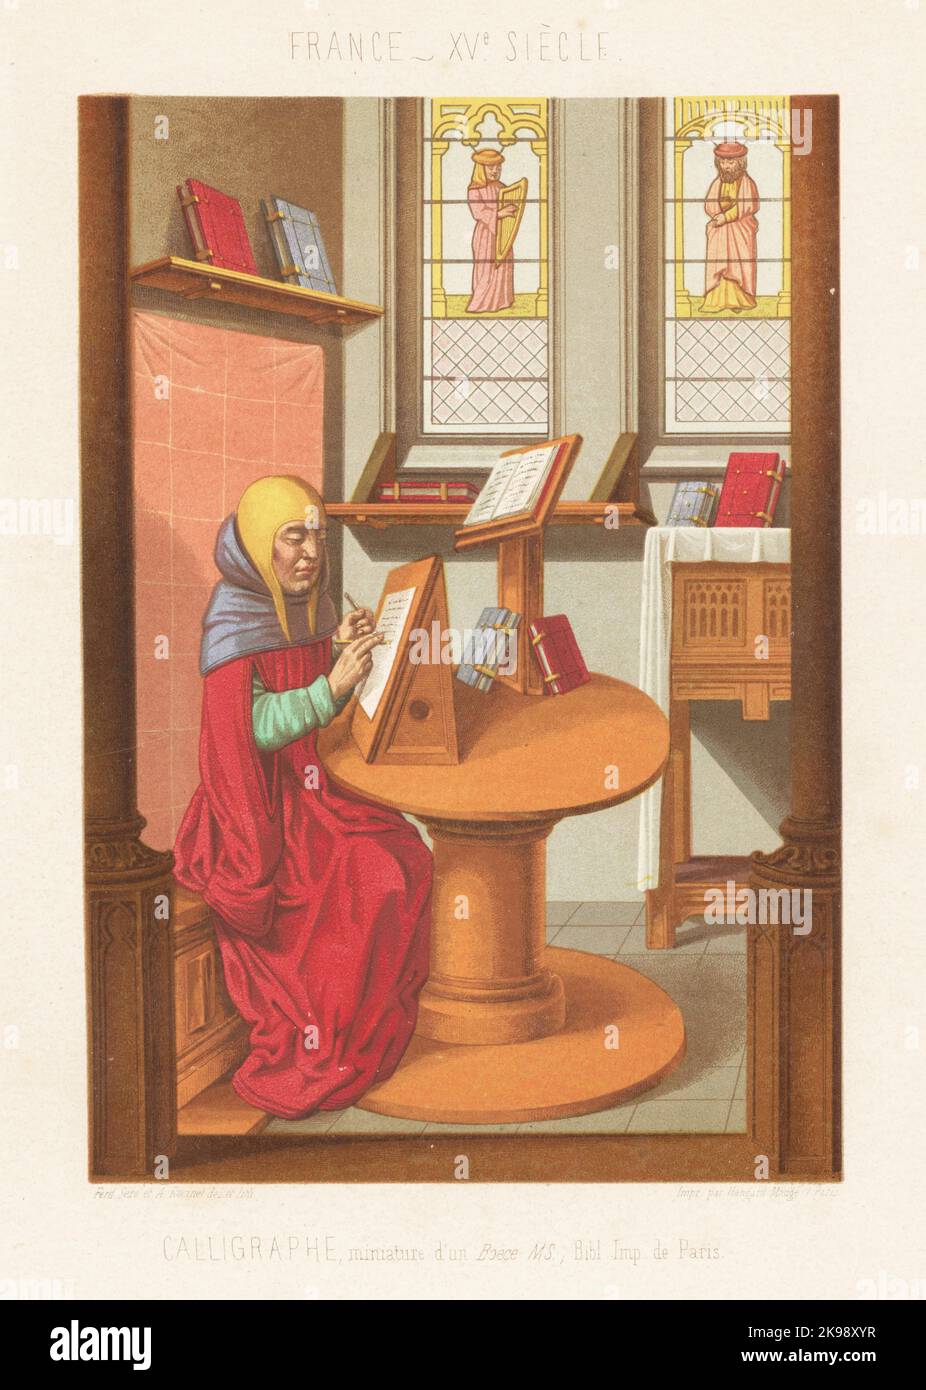 A calligrapher transcribing a manuscript book in his study, France, 15th century. He writes at a lectern in a room with leather-bound books, stained-glass windows. From a manuscript of Boethius's De consolatione philosophiae, MS 6643, Ancien Fonds Latin, Bibliotheque Imperiale. Chromolithograph by Ferdinand Sere and Auguste Racinet from Charles Louandre’s Les Arts Somptuaires, The Sumptuary Arts, Hangard-Mauge, Paris, 1858. Stock Photo